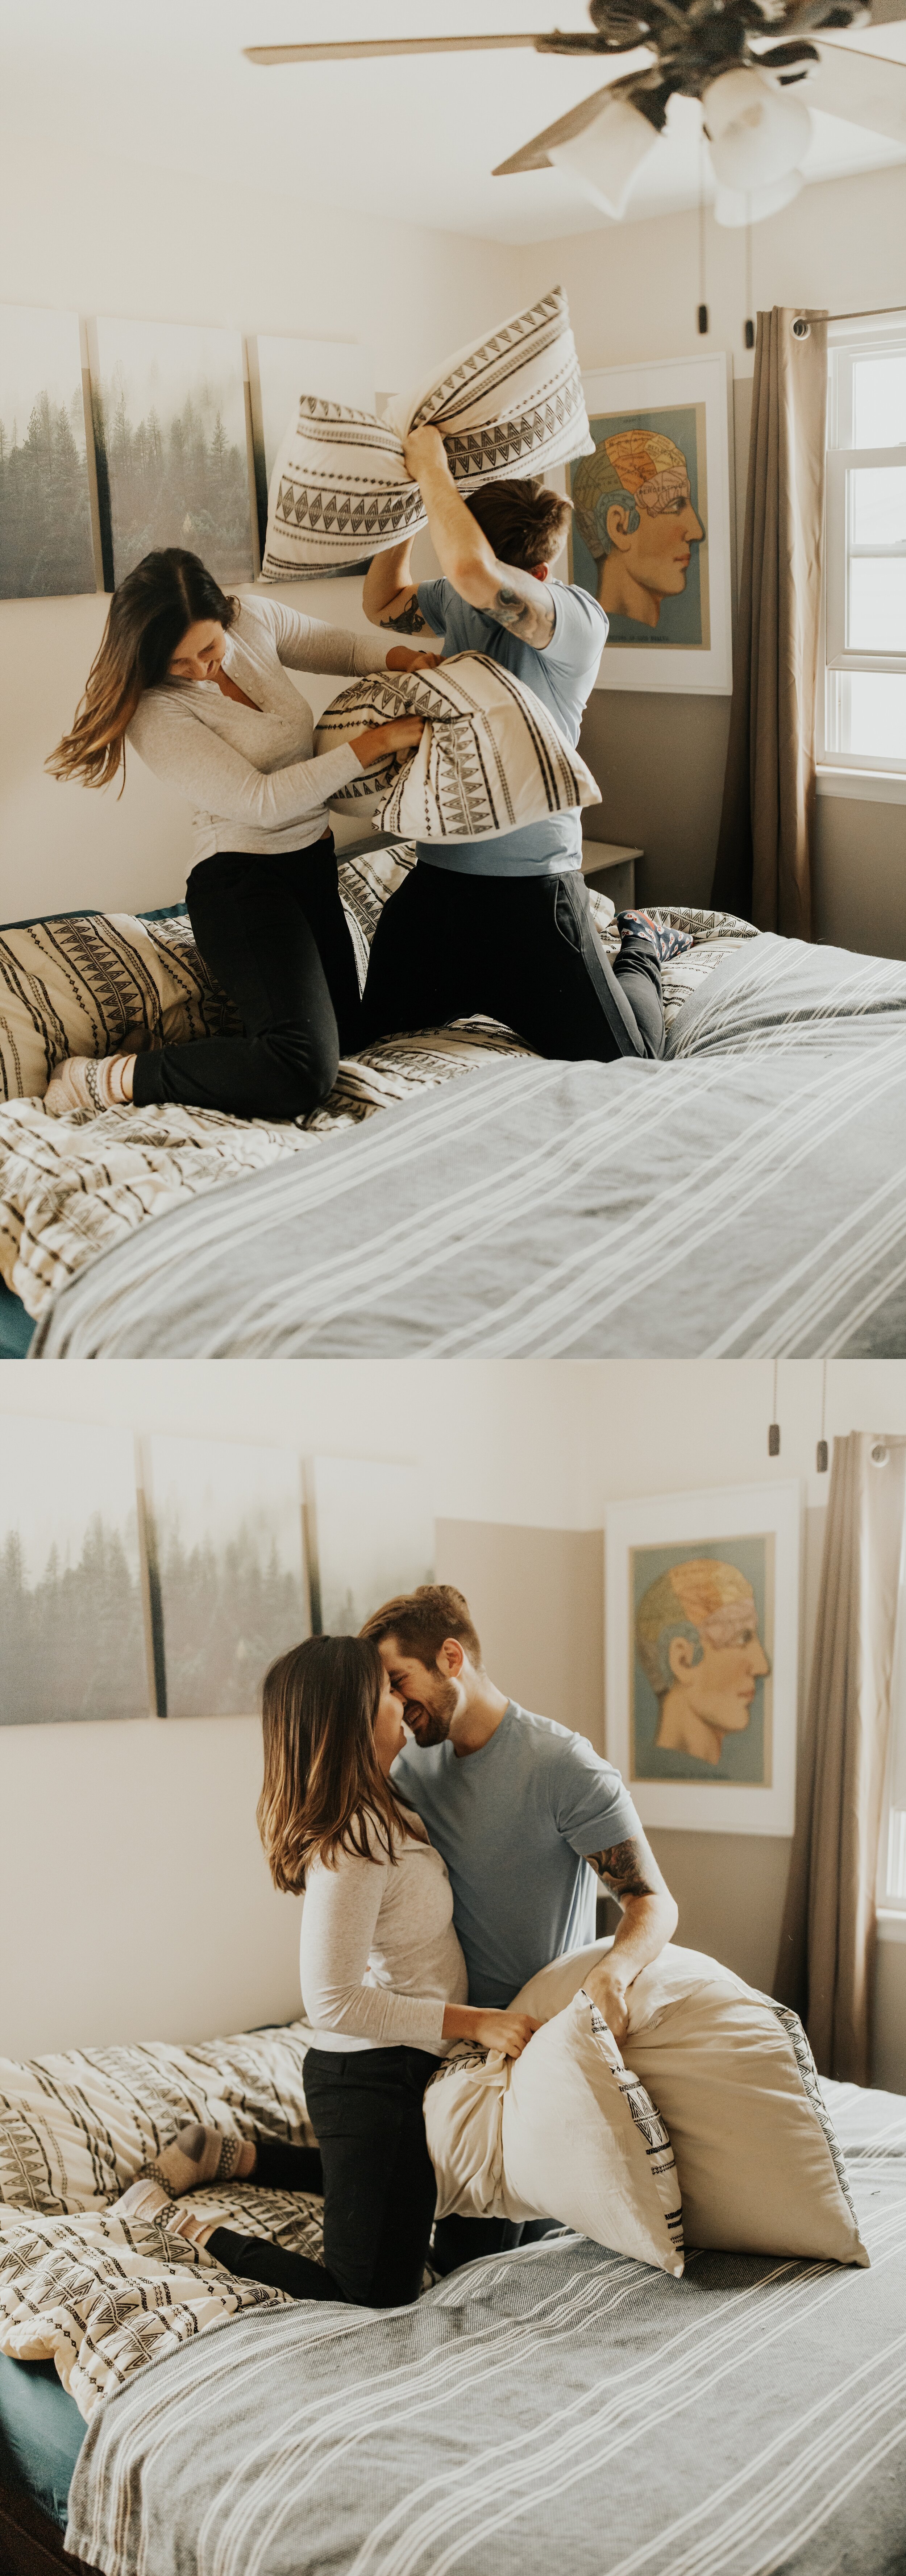 jessika-christine-photography-in+home-engagement-couples-cozy-adventurous-session (24).jpg